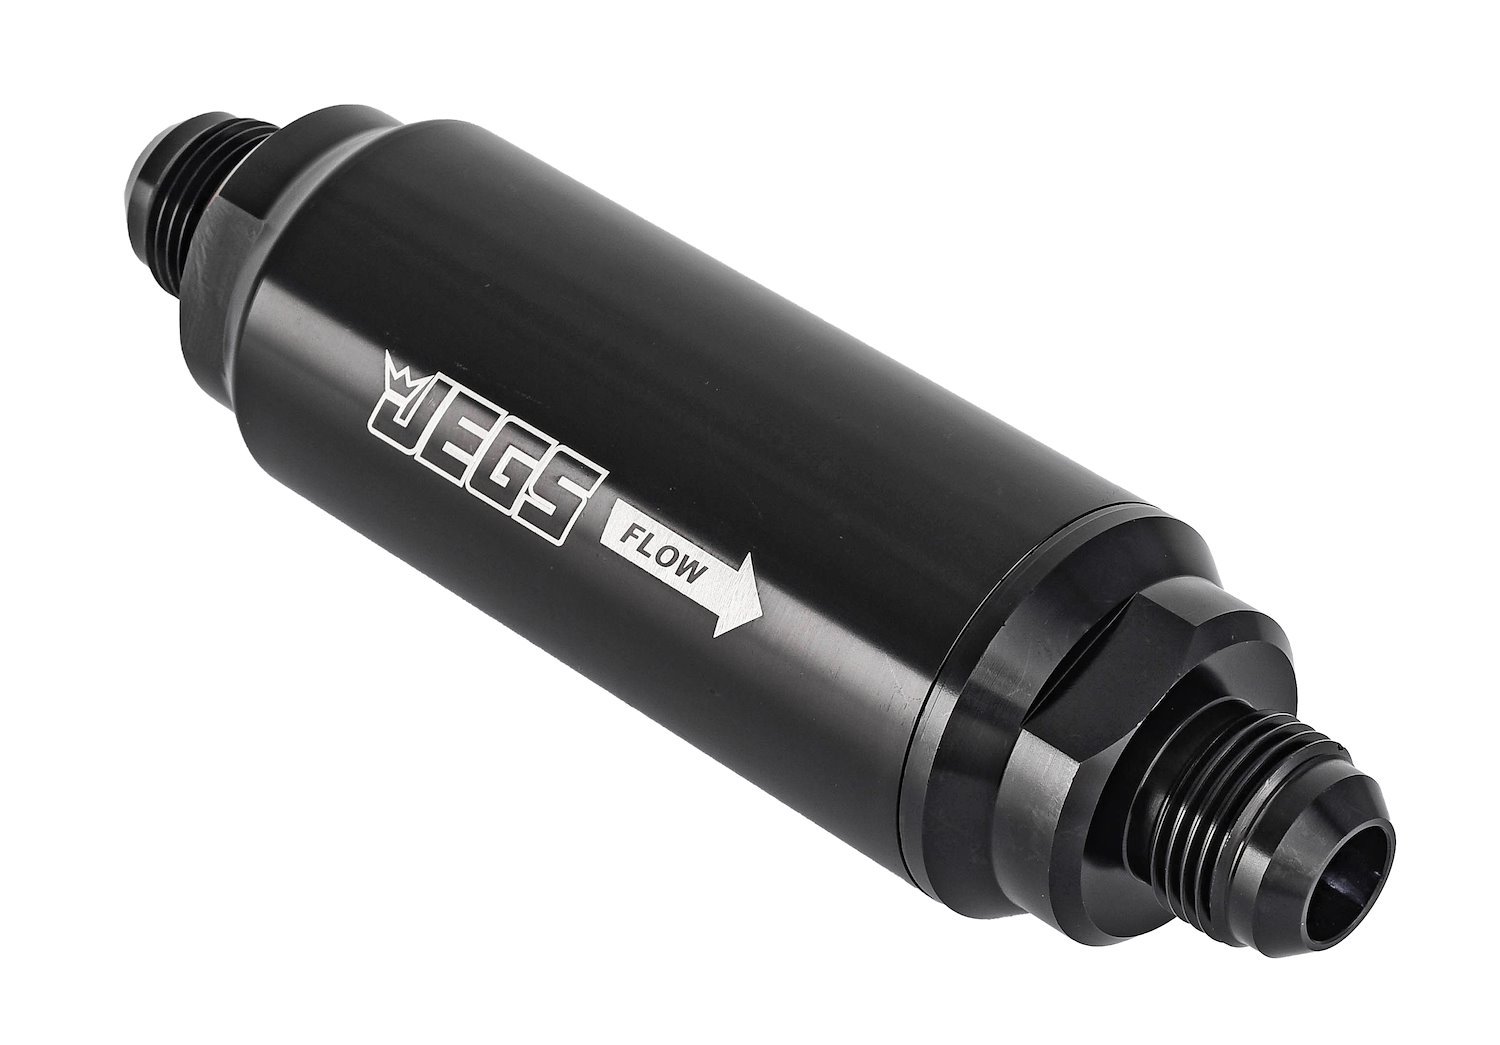 Billet Aluminum In-Line Fuel Filter for Gas, E85 & Alcohol Applications, 5 in. Long [-10 AN Black]